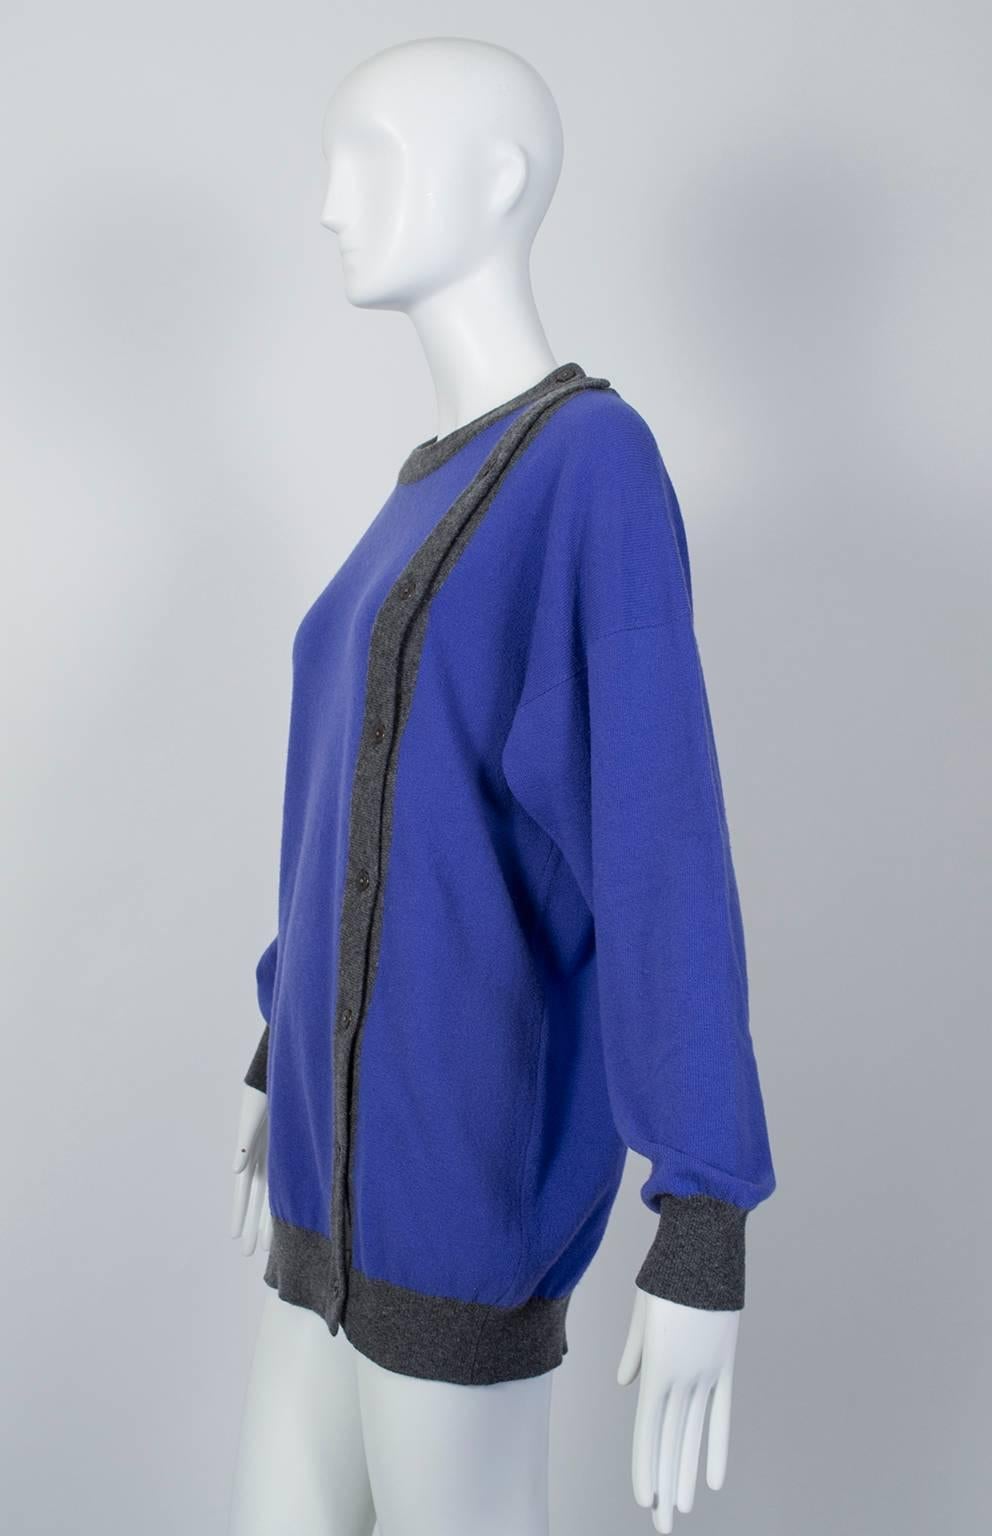 Beyond its forgiving, boxy cut and vibrant periwinkle color, the magic of this sweater is its fully unbuttoning asymmetrical front closure. Leave a few buttons undone at the hemline for a custom vent or unbutton the whole thing for an off-kilter